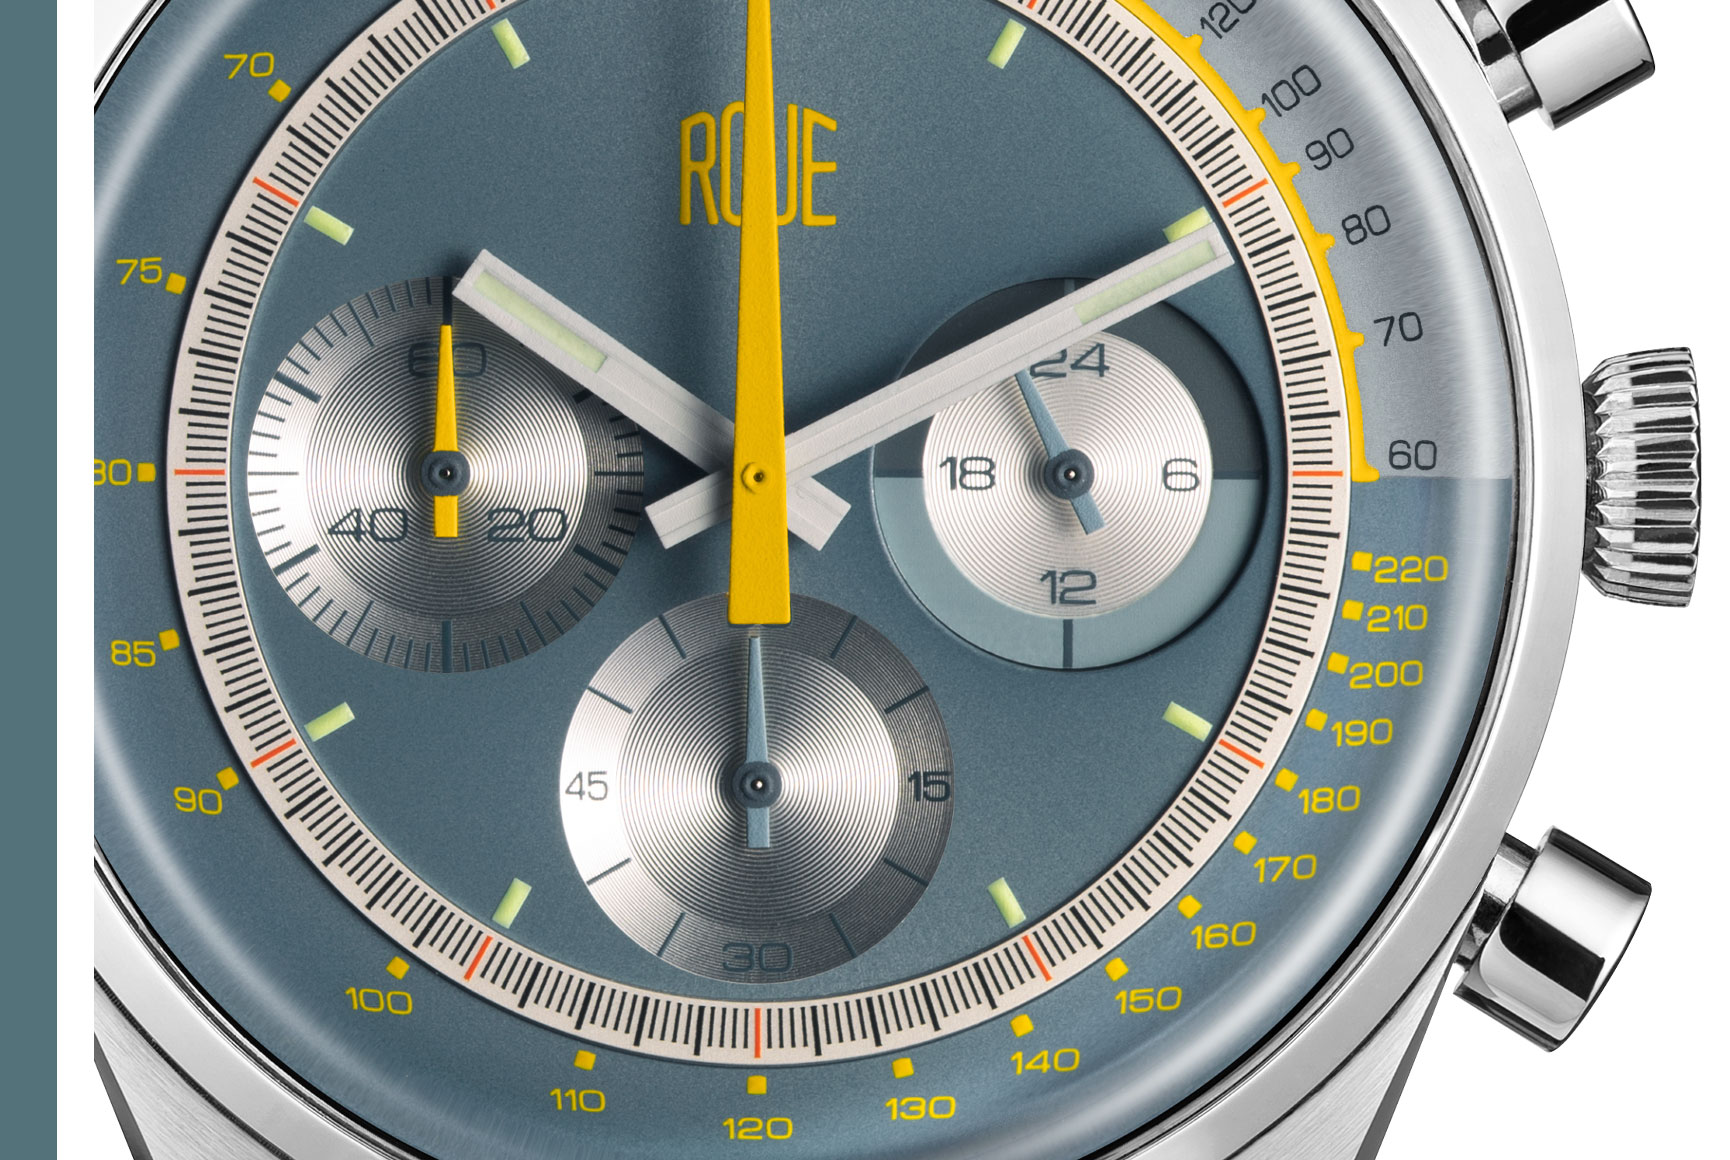 Roue Watch TPS Model - Triple layers dial construction with tachymeter and pulsometer functions